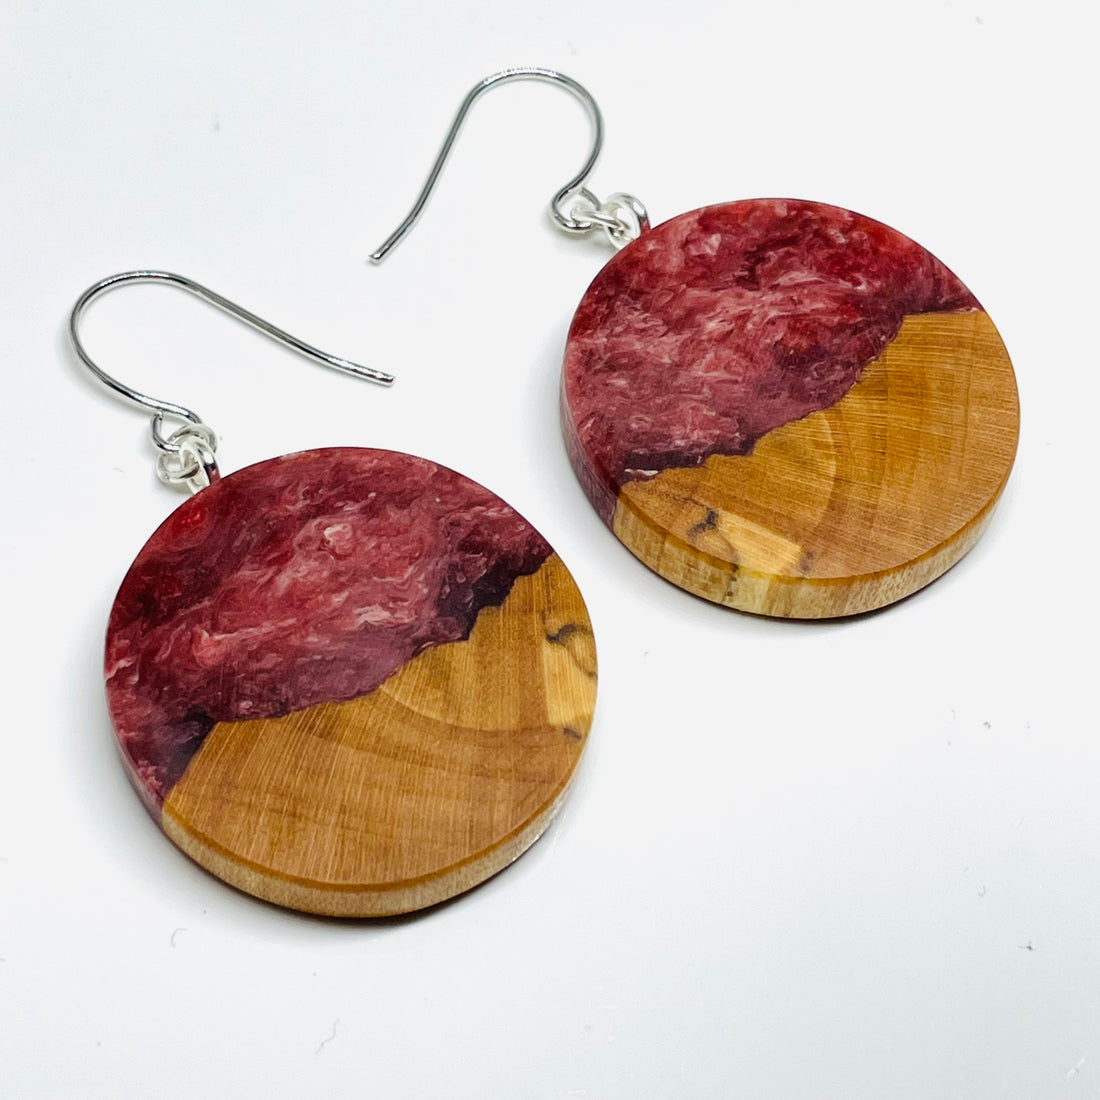 handmade jewelry, Minnesota local wood and resin artist. Deep red and white swirled resin with spalted maple wood, nickel free dangle earrings circle shaped